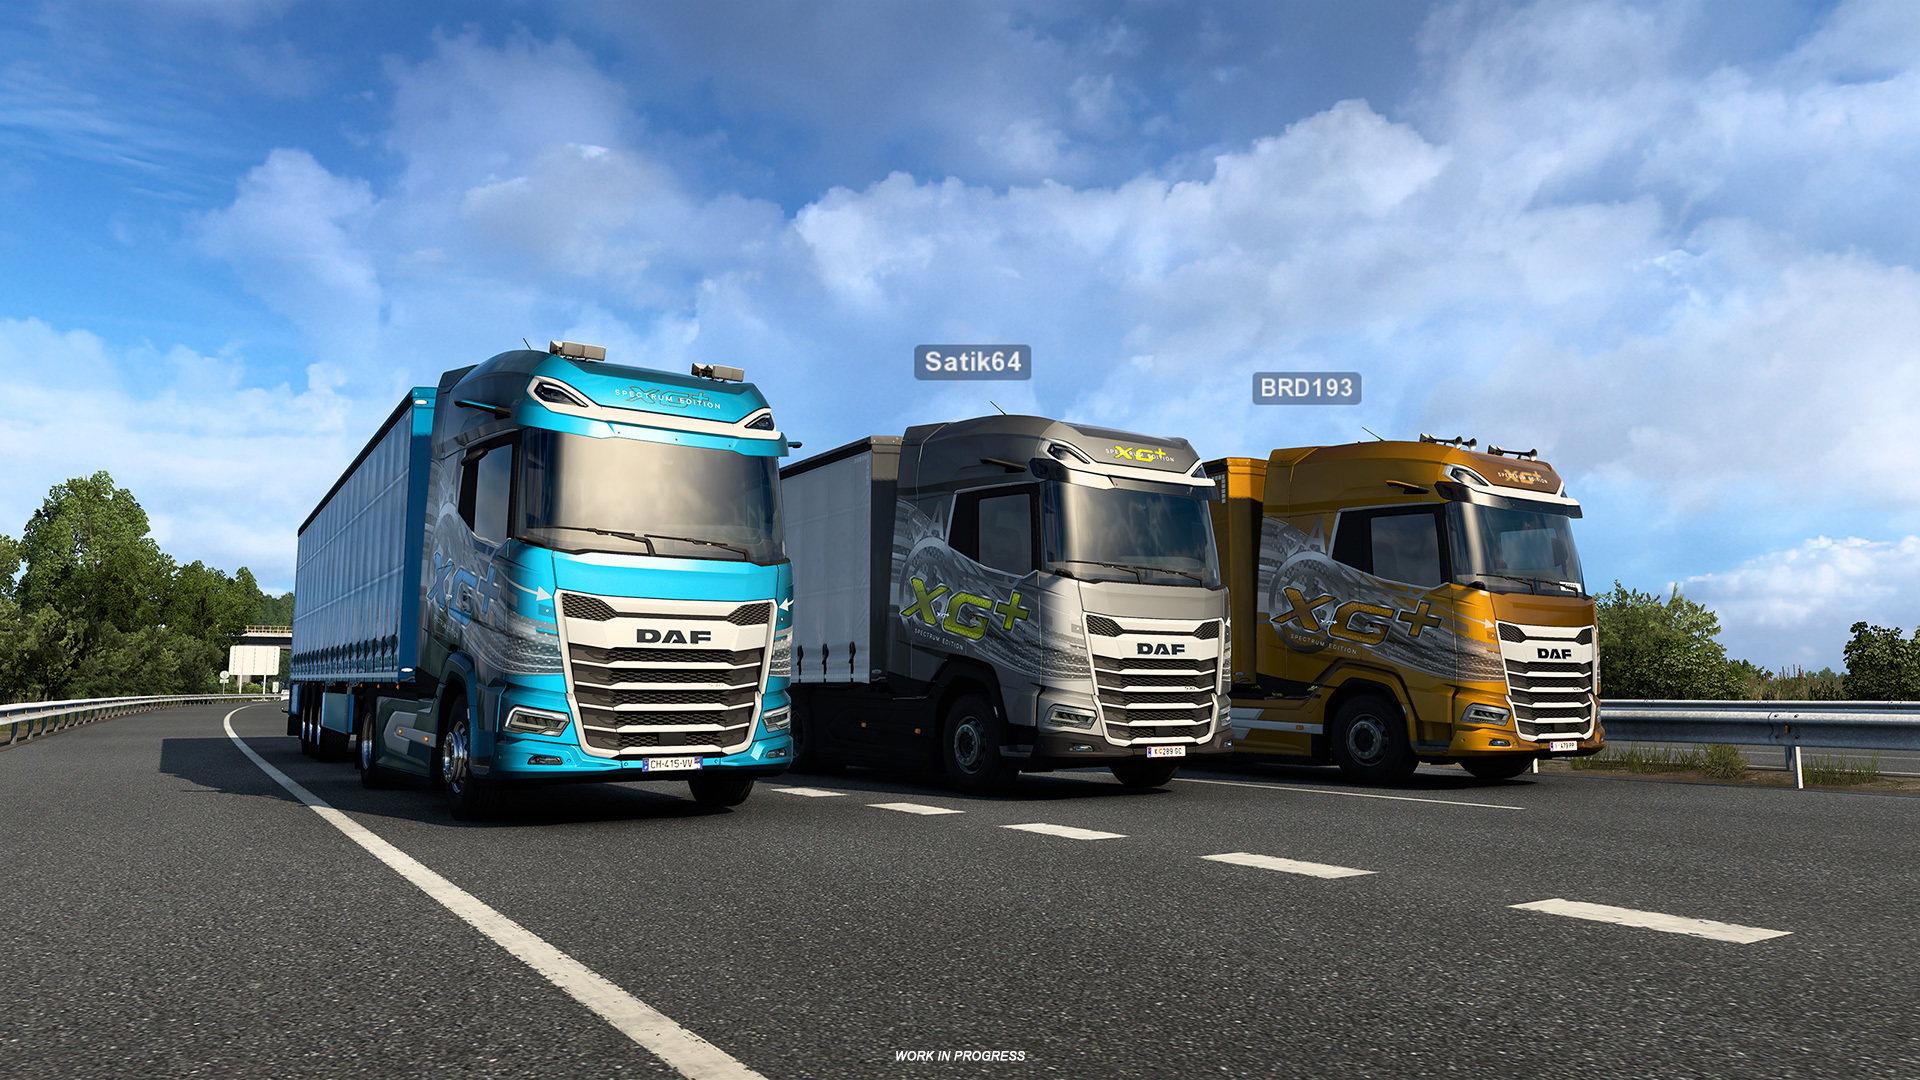 A little more of France in Euro Truck Simulator 1.40 beta 2